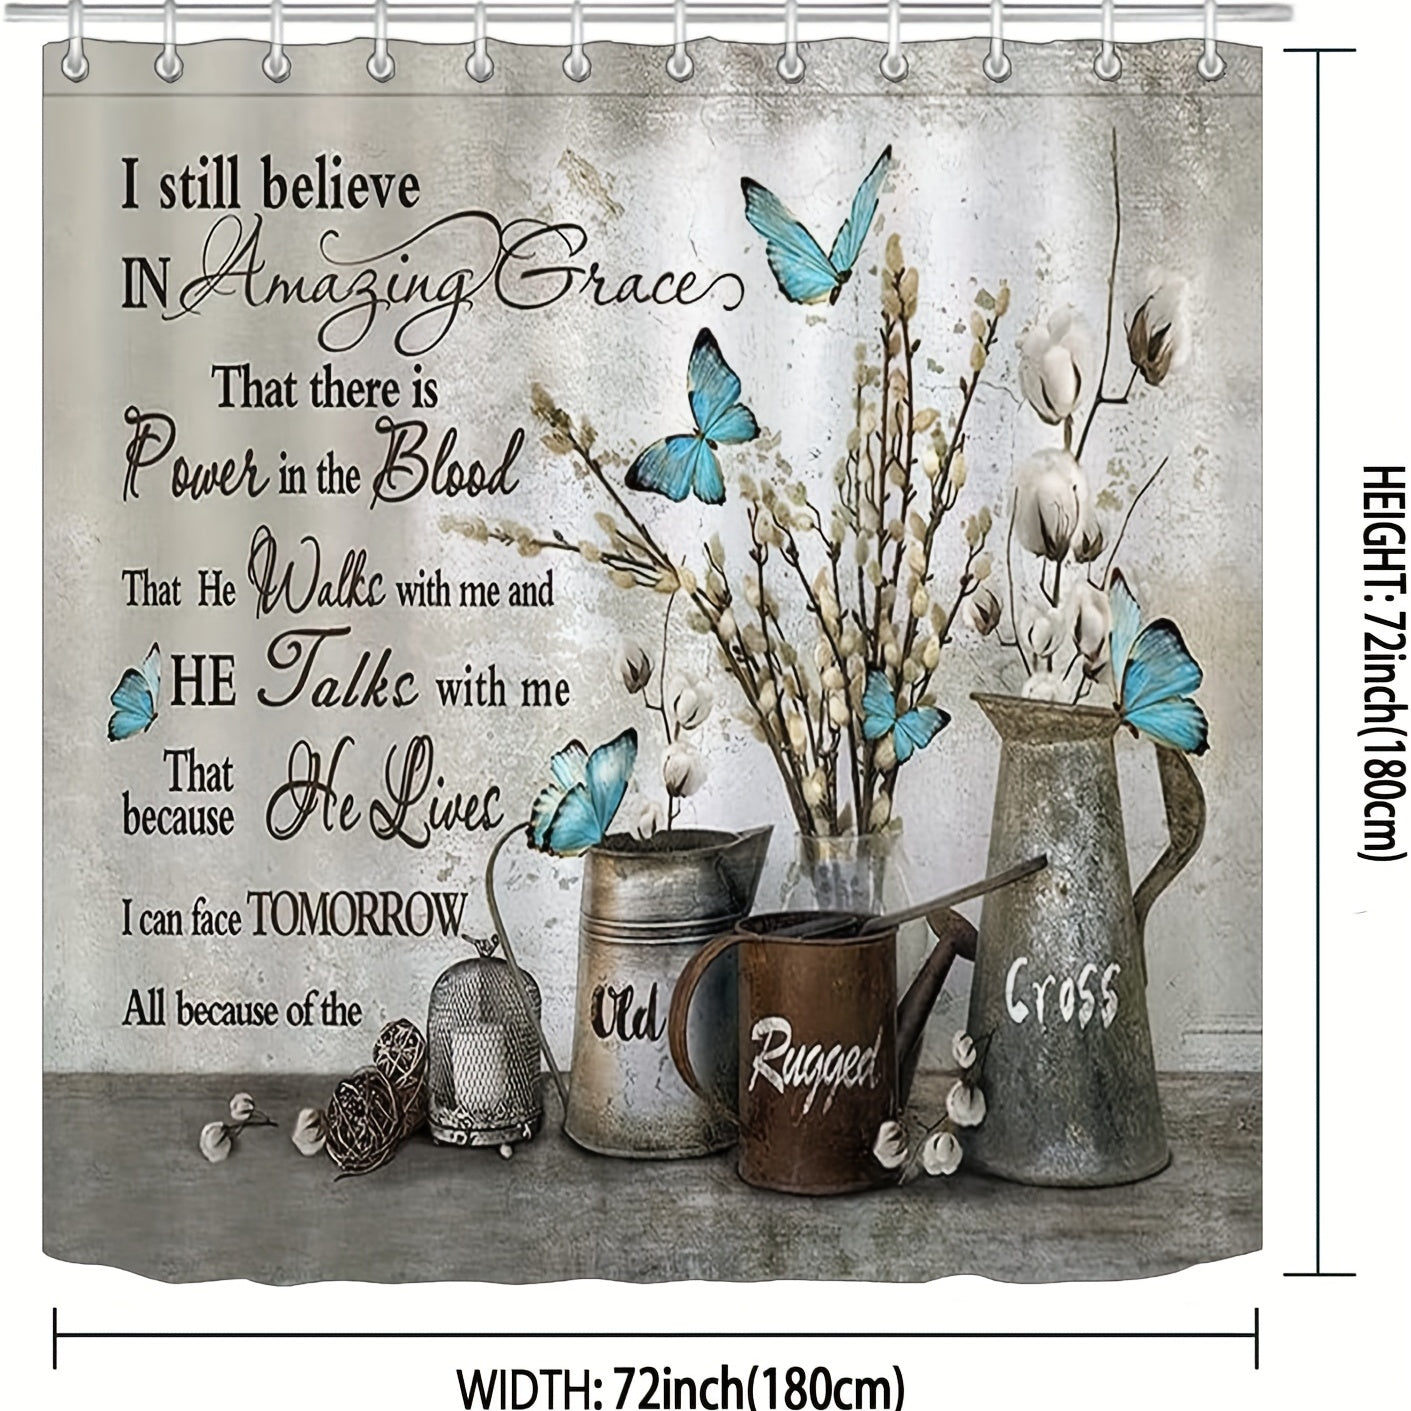 I Still Believe In Amazing Grace Shower Curtain With 12 Hooks 72*72in claimedbygoddesigns